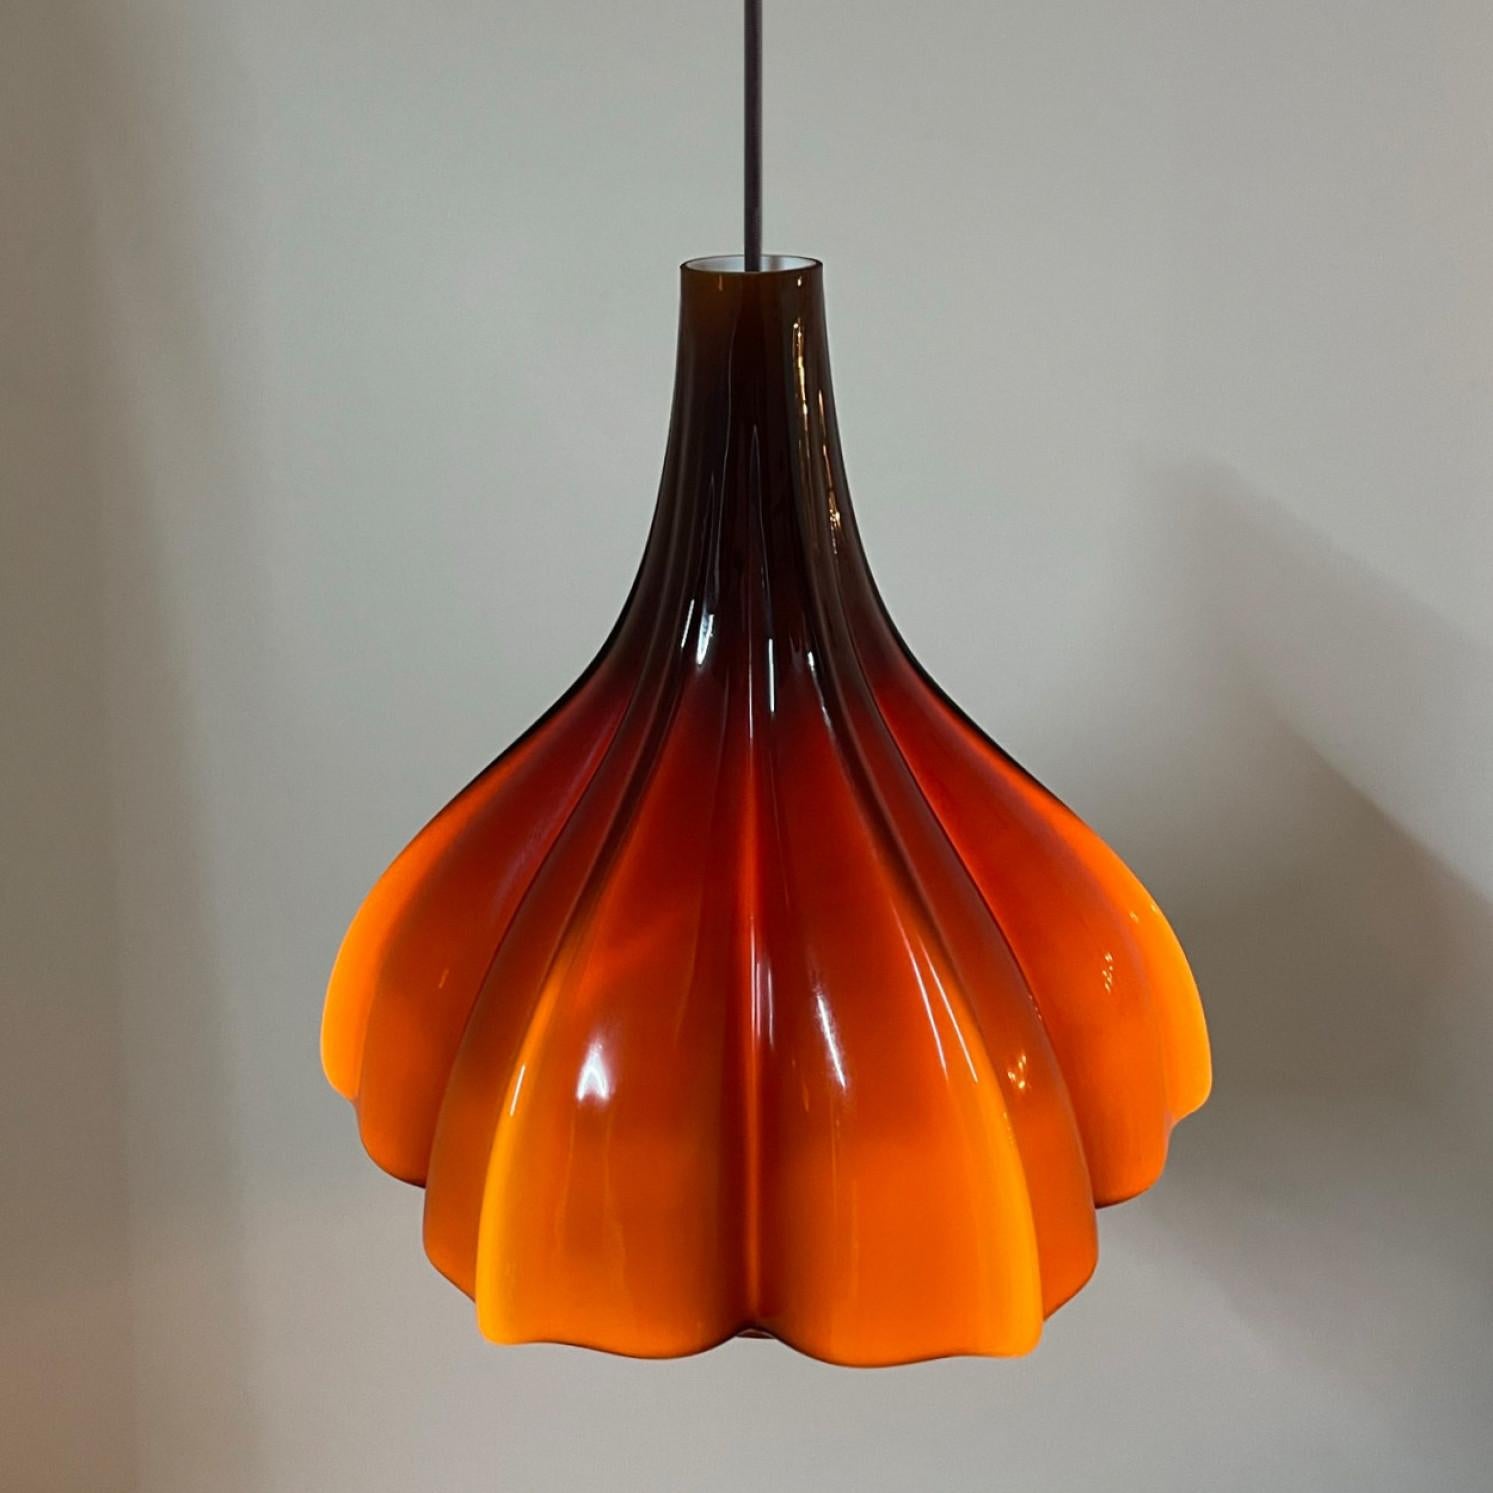 Flower shaped Opaque Brown Glass Fixtures, Europe 1970 For Sale 4